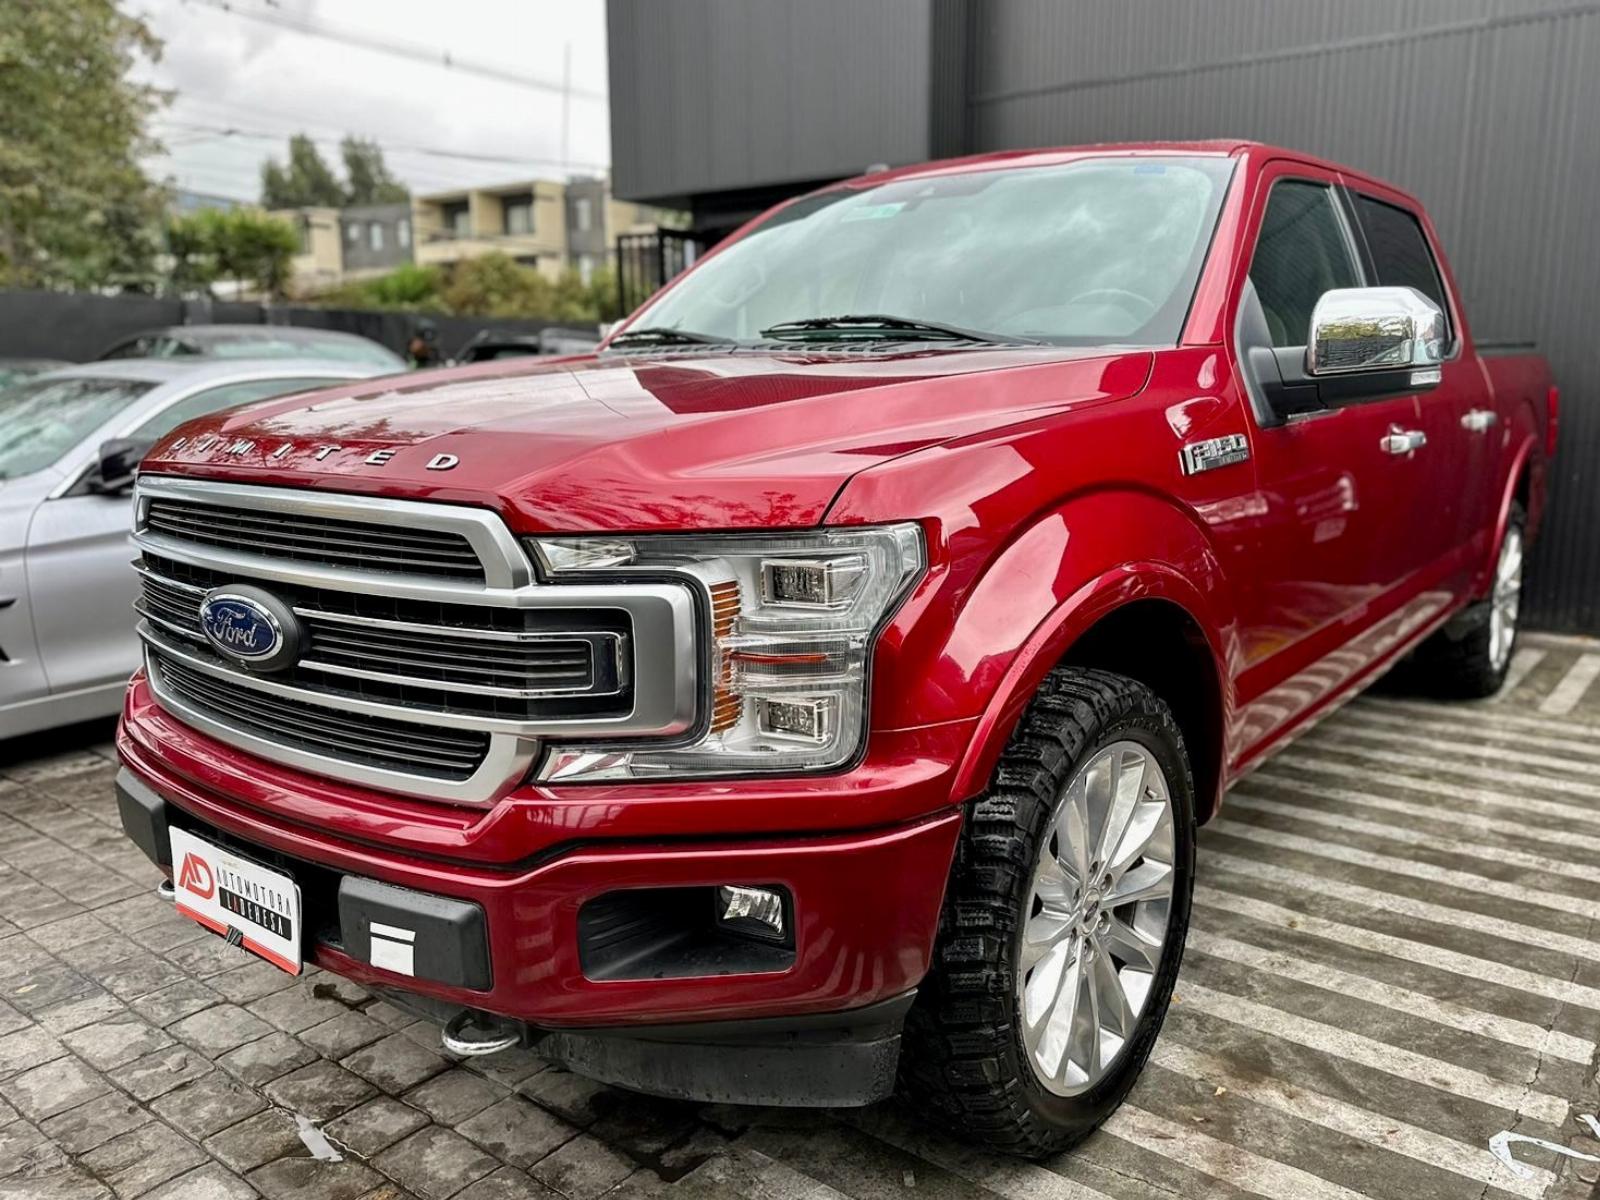 FORD F-150 LIMITED 2020 3.5 ECOBOOST 4x4 - FULL MOTOR